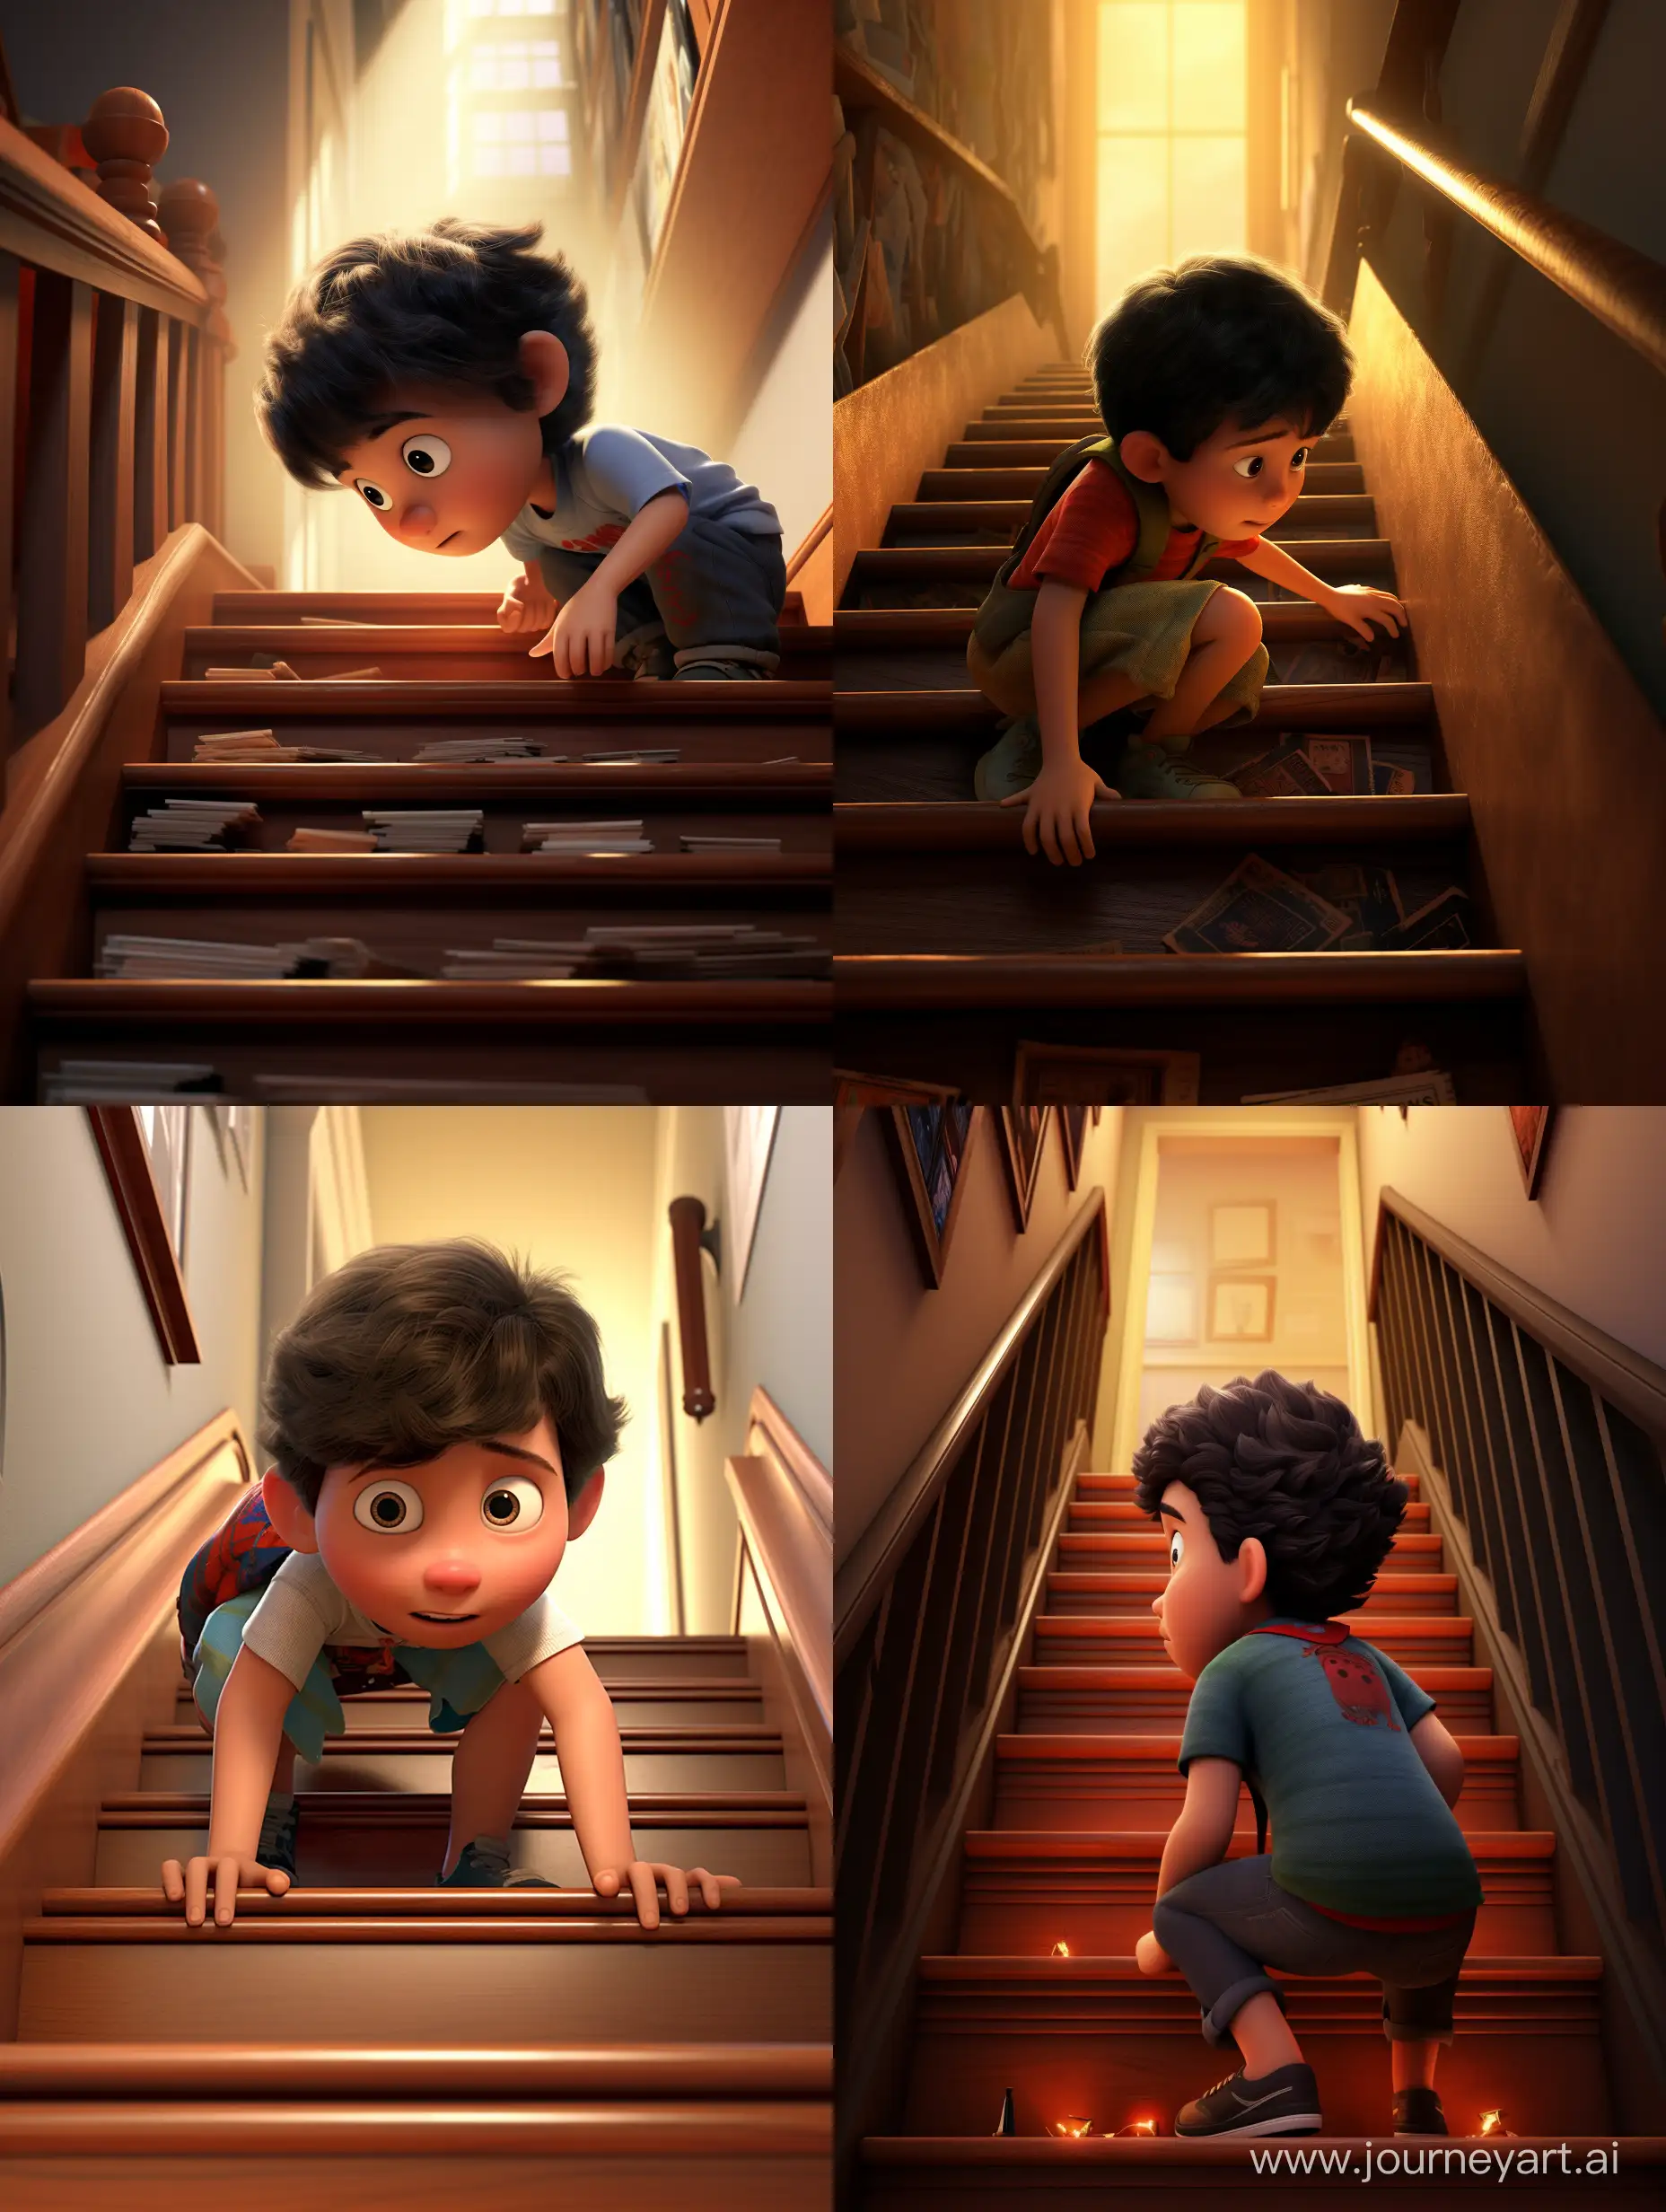 A child on all fours carefully descends the stairs. Pixar style